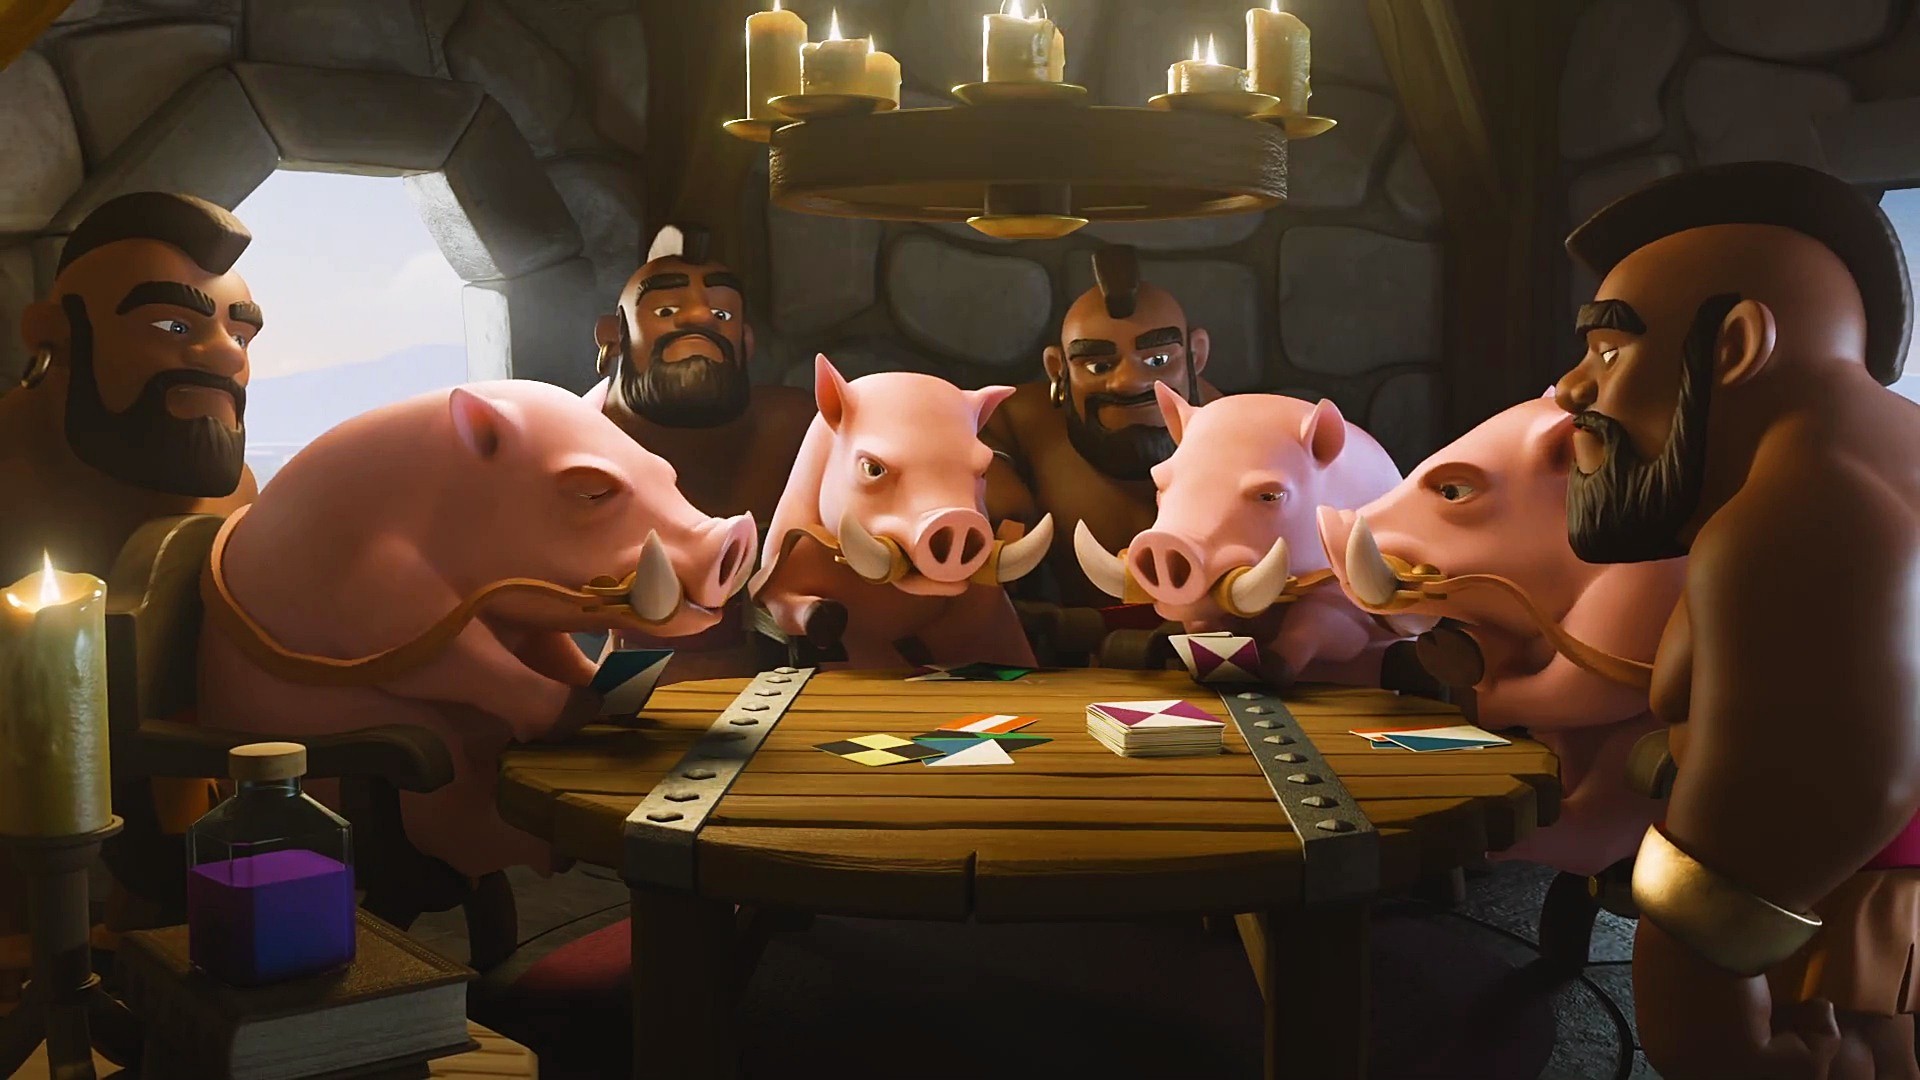 Clash of Clans Ride of The Hog Riders 2016 Wallpaper.